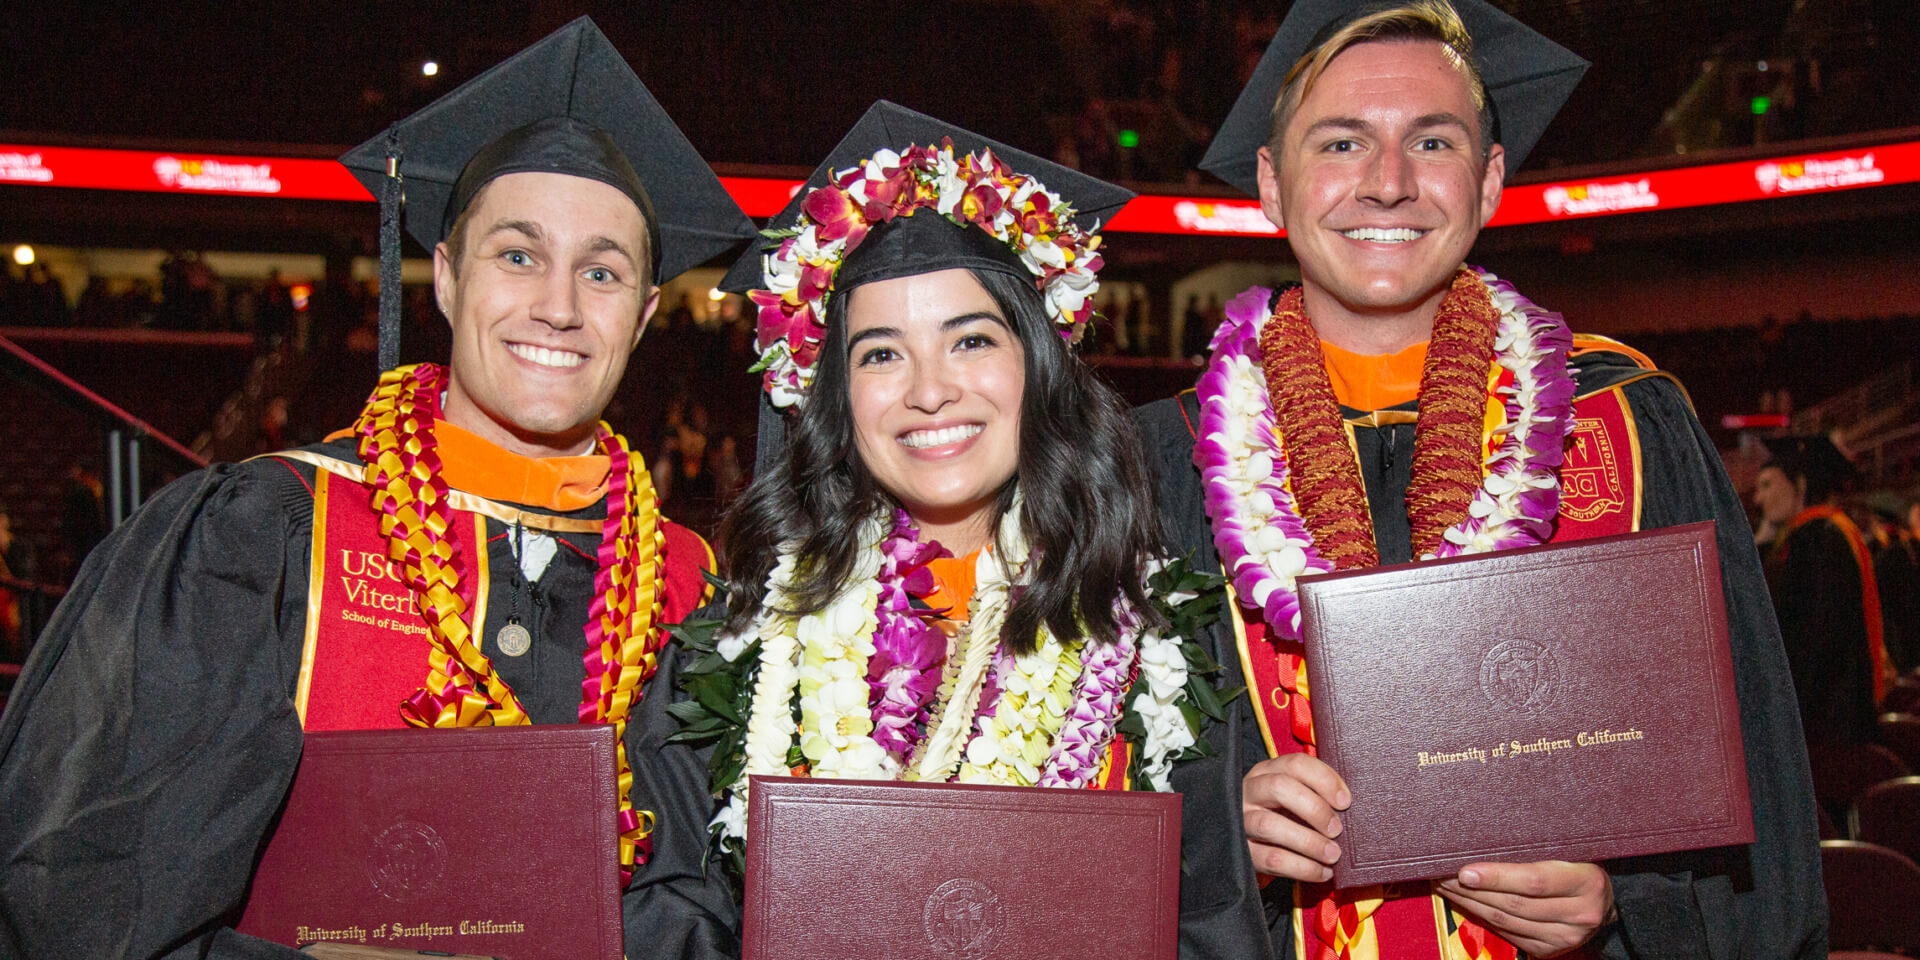 Wide Awake and Dreaming: USC Viterbi’s 2023 Master’s Commencement Ceremonies